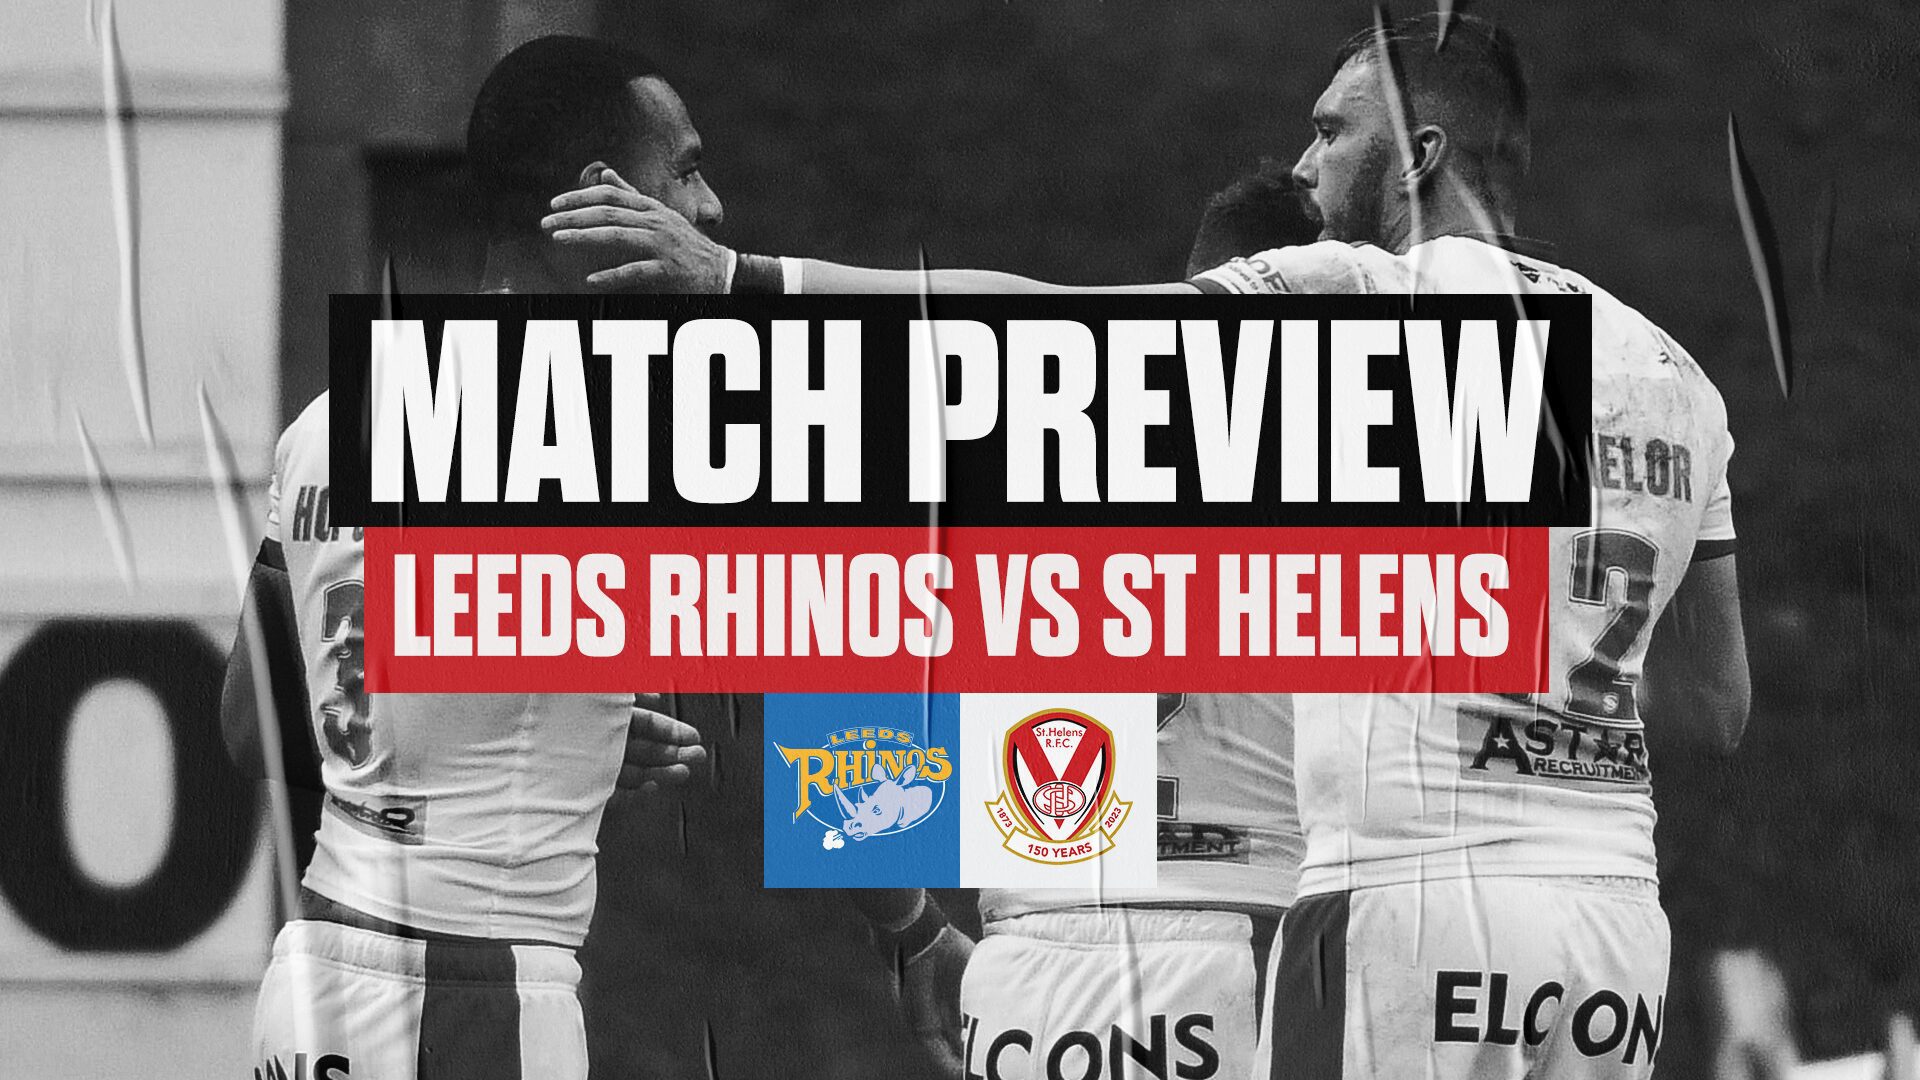 Match Preview Leeds Rhinos (A) St.Helens R.F.C.